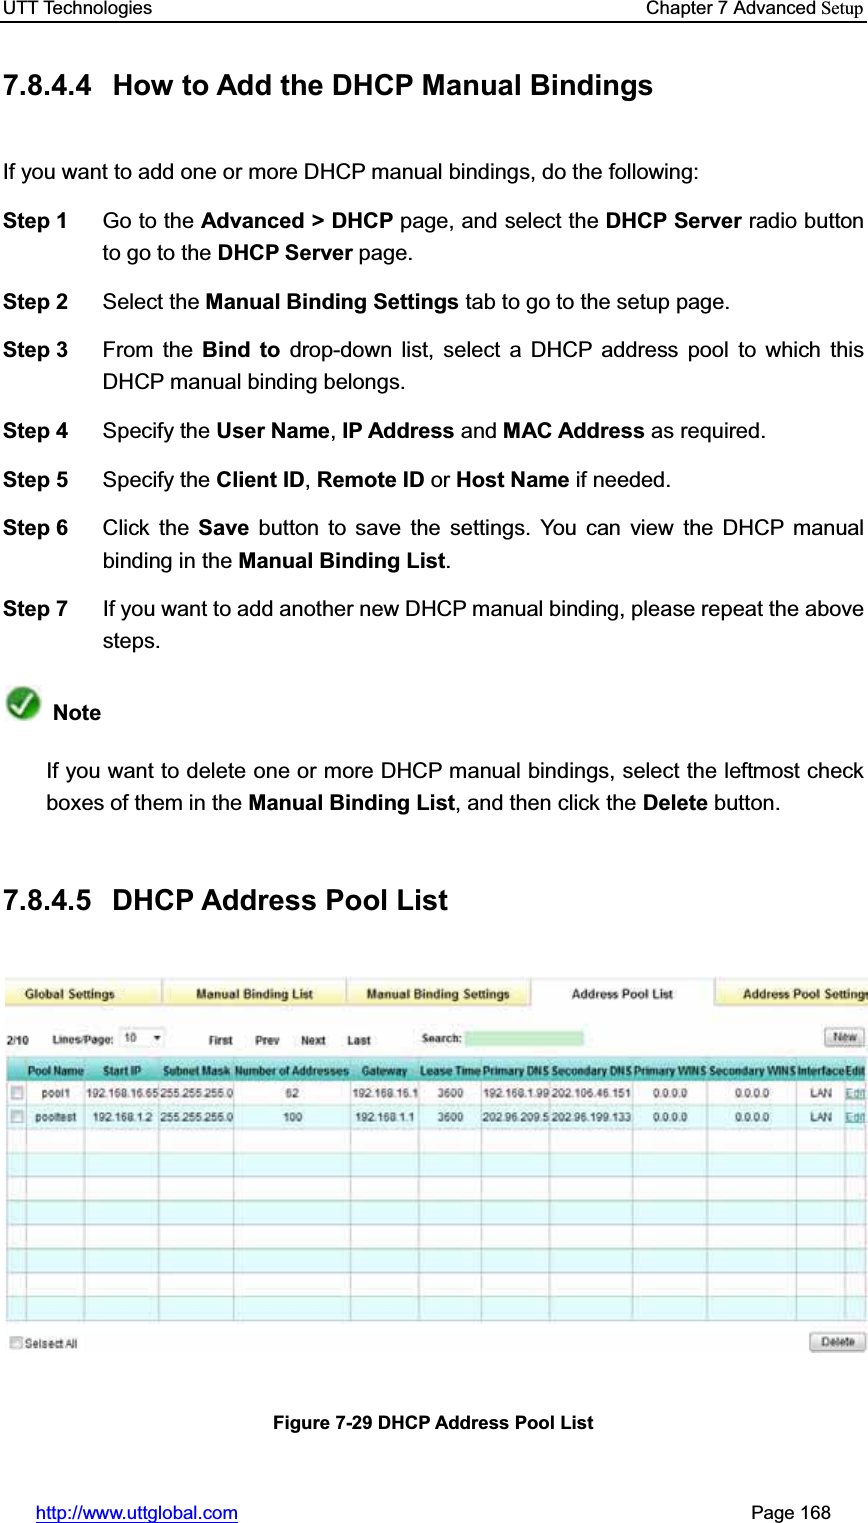 UTT Technologies    Chapter 7 Advanced Setuphttp://www.uttglobal.com                                                       Page 168 7.8.4.4  How to Add the DHCP Manual Bindings If you want to add one or more DHCP manual bindings, do the following:   Step 1  Go to the Advanced &gt; DHCP page, and select the DHCP Server radio button to go to the DHCP Server page. Step 2  Select the Manual Binding Settings tab to go to the setup page. Step 3  From the Bind to drop-down list, select a DHCP address pool to which this DHCP manual binding belongs. Step 4  Specify the User Name,IP Address and MAC Address as required. Step 5  Specify the Client ID,Remote ID or Host Name if needed. Step 6  Click the Save button to save the settings. You can view the DHCP manual binding in the Manual Binding List.Step 7  If you want to add another new DHCP manual binding, please repeat the above steps. NoteIf you want to delete one or more DHCP manual bindings, select the leftmost check boxes of them in the Manual Binding List, and then click the Delete button. 7.8.4.5 DHCP Address Pool List Figure 7-29 DHCP Address Pool List 